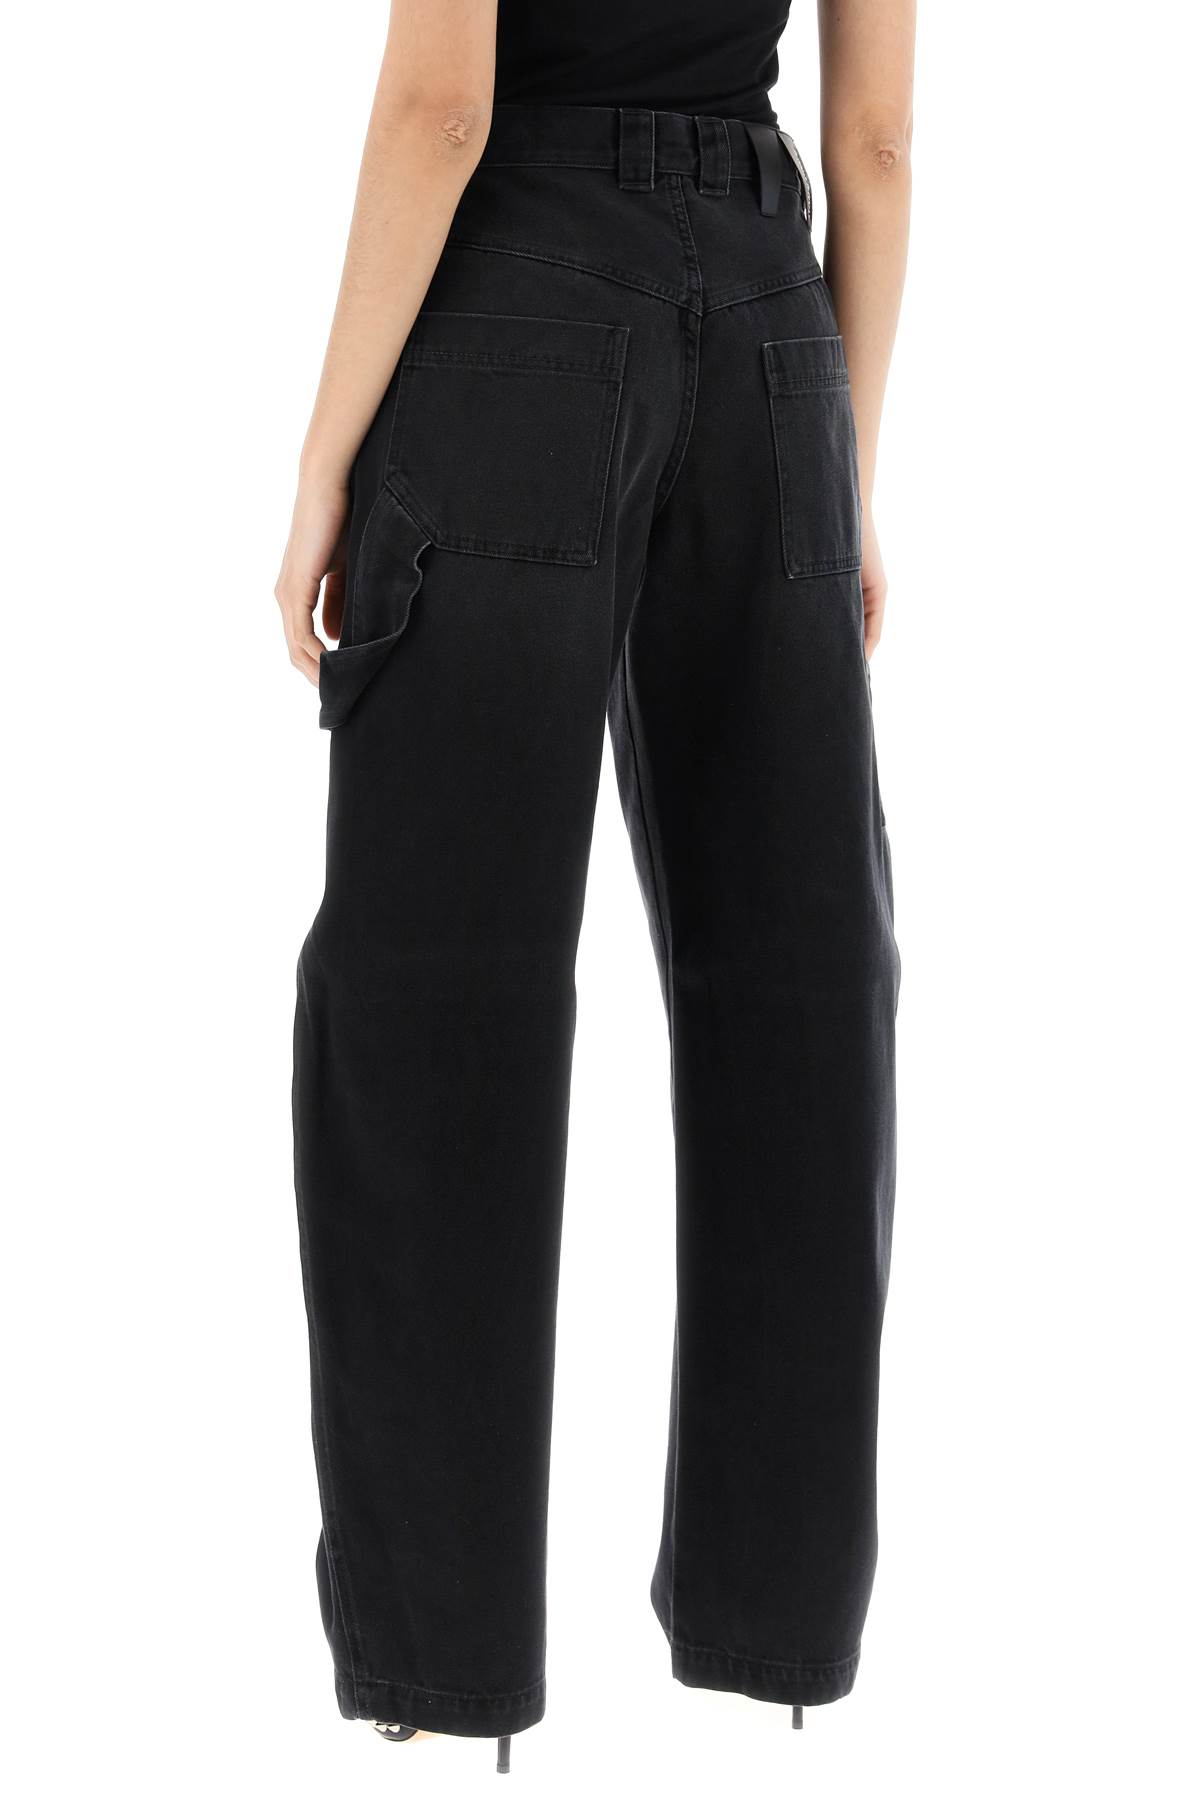 Shop Darkpark Audrey Cargo Jeans With Curved Leg In Washed Black (black)